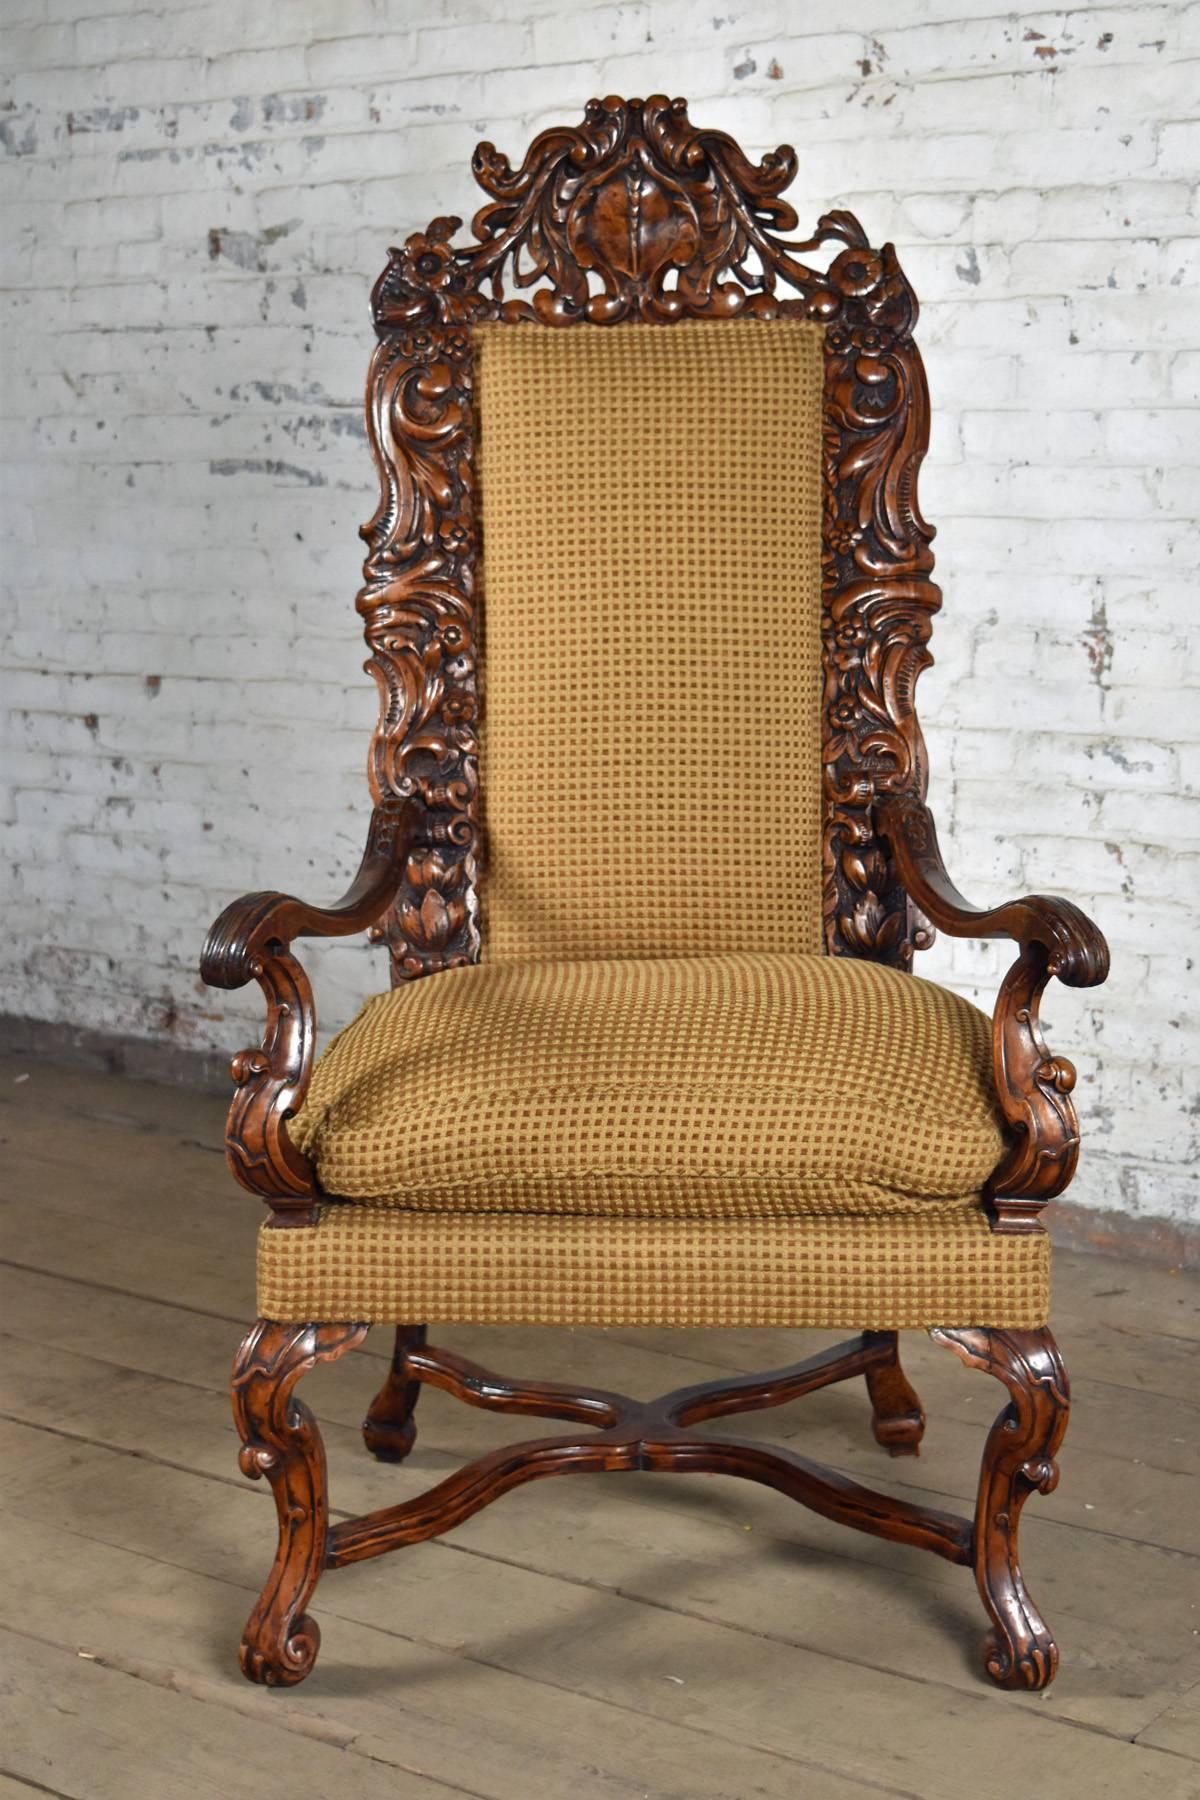 Very Comfortable and Rare Armchair of Generous Proportions and stately appearance, exuberantly carved Beech Wood frame, with scrolling floral motives, wavy open arms, cabriole legs joined by shaped X-stretchers.
Seat height 19